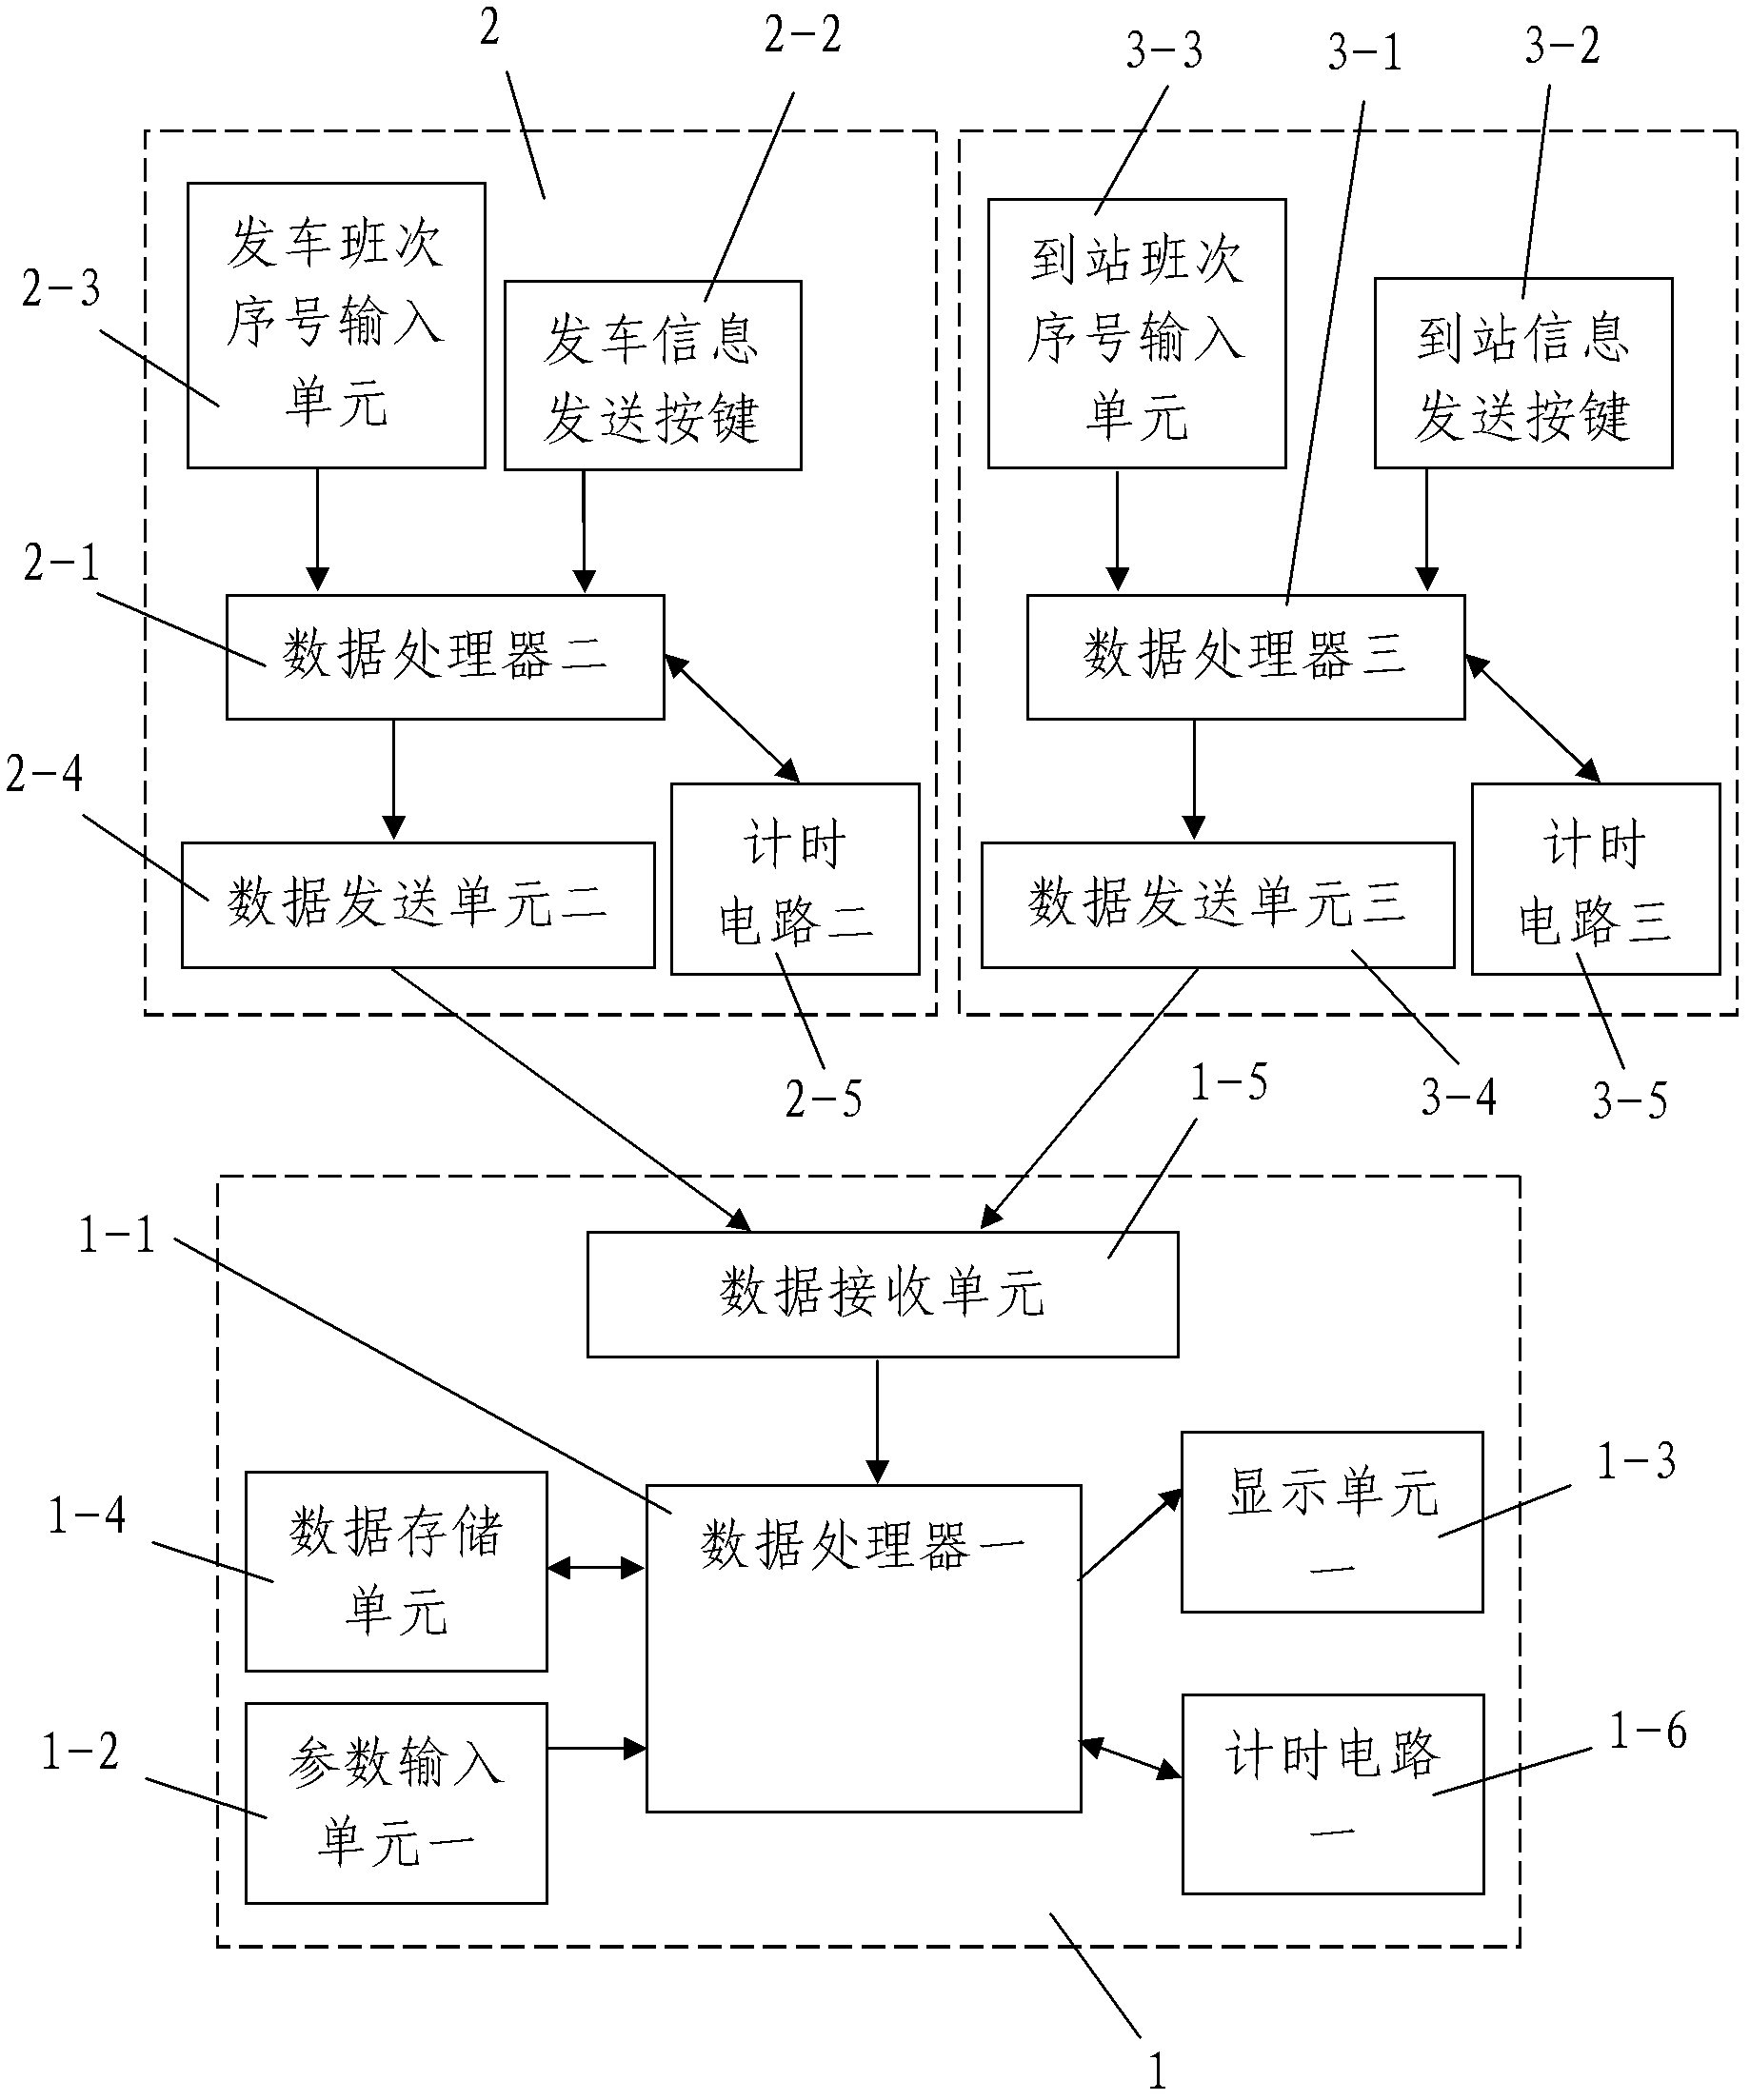 Automatic counting system for bus scheduling information